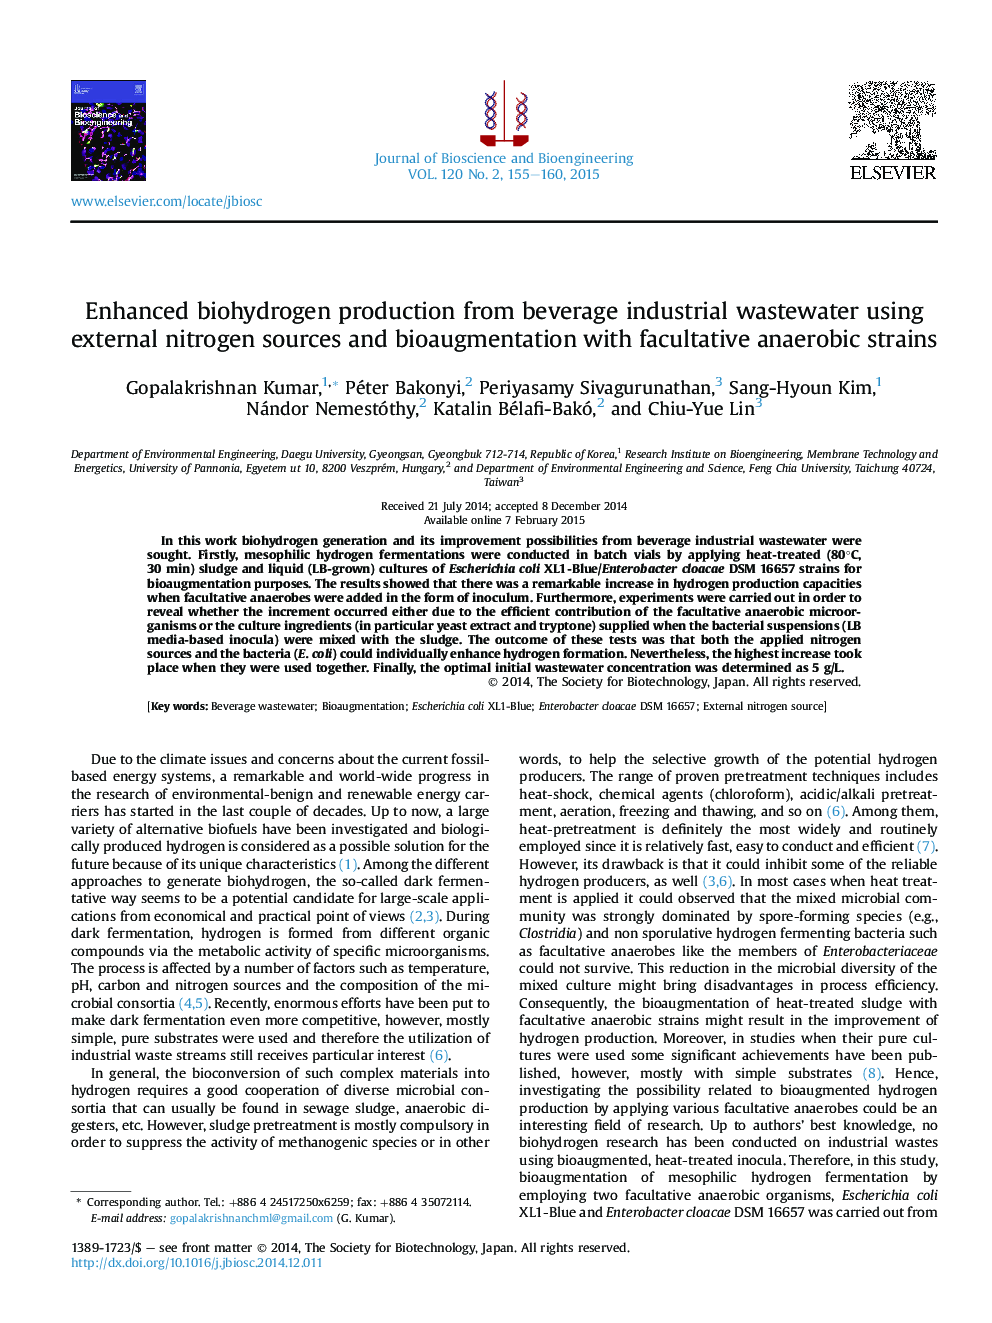 Enhanced biohydrogen production from beverage industrial wastewater using external nitrogen sources and bioaugmentation with facultative anaerobic strains